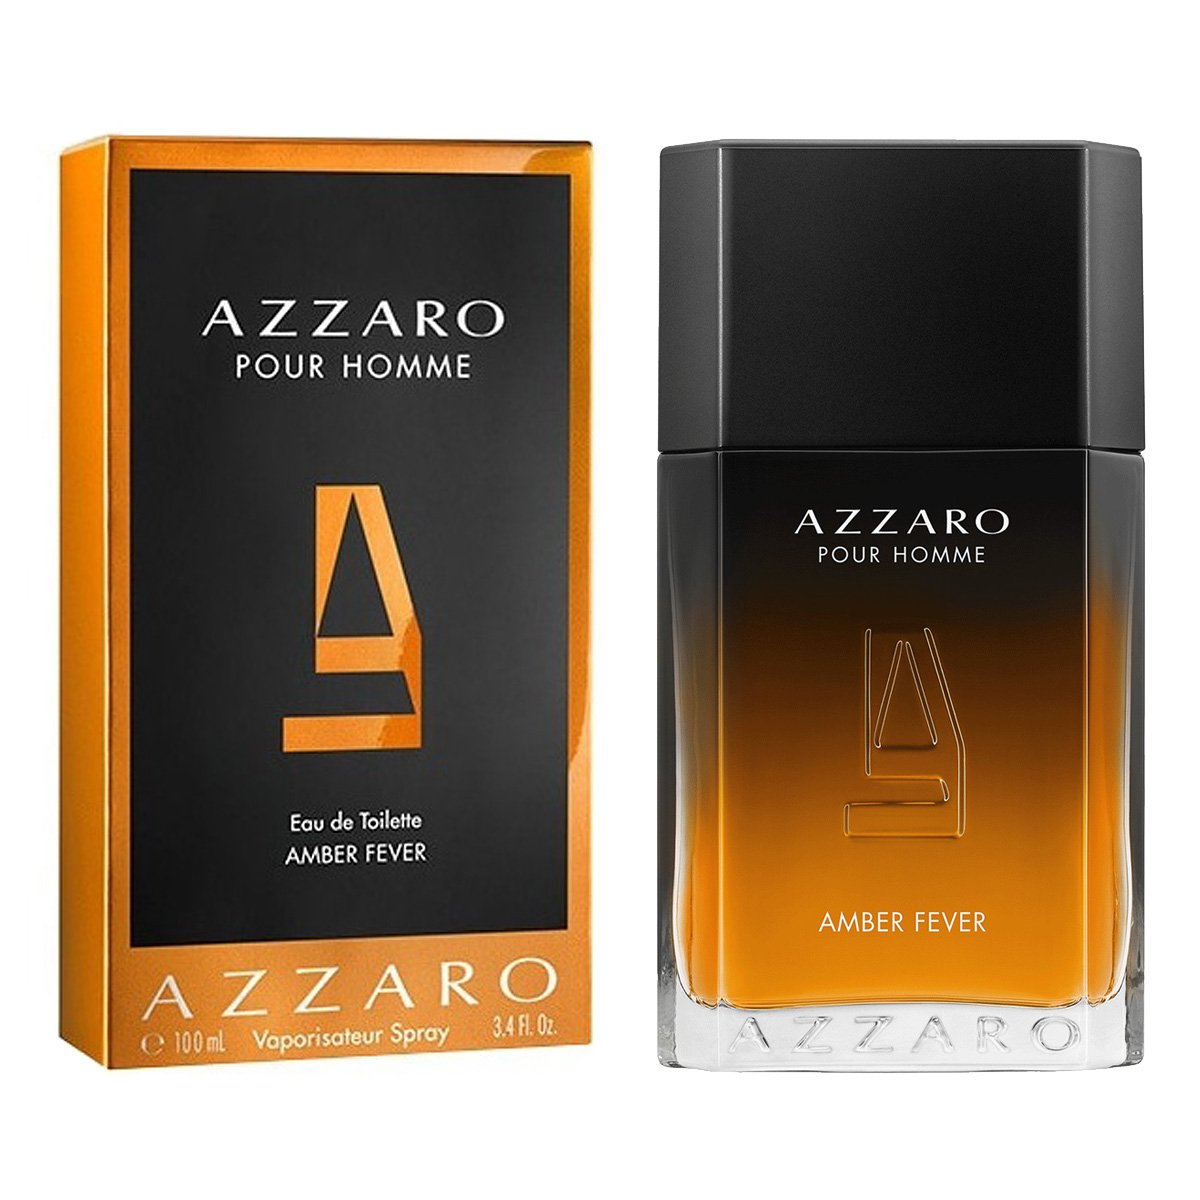 assets/images/azzaro/azzaro_pour_homme_amber_fever.jpg